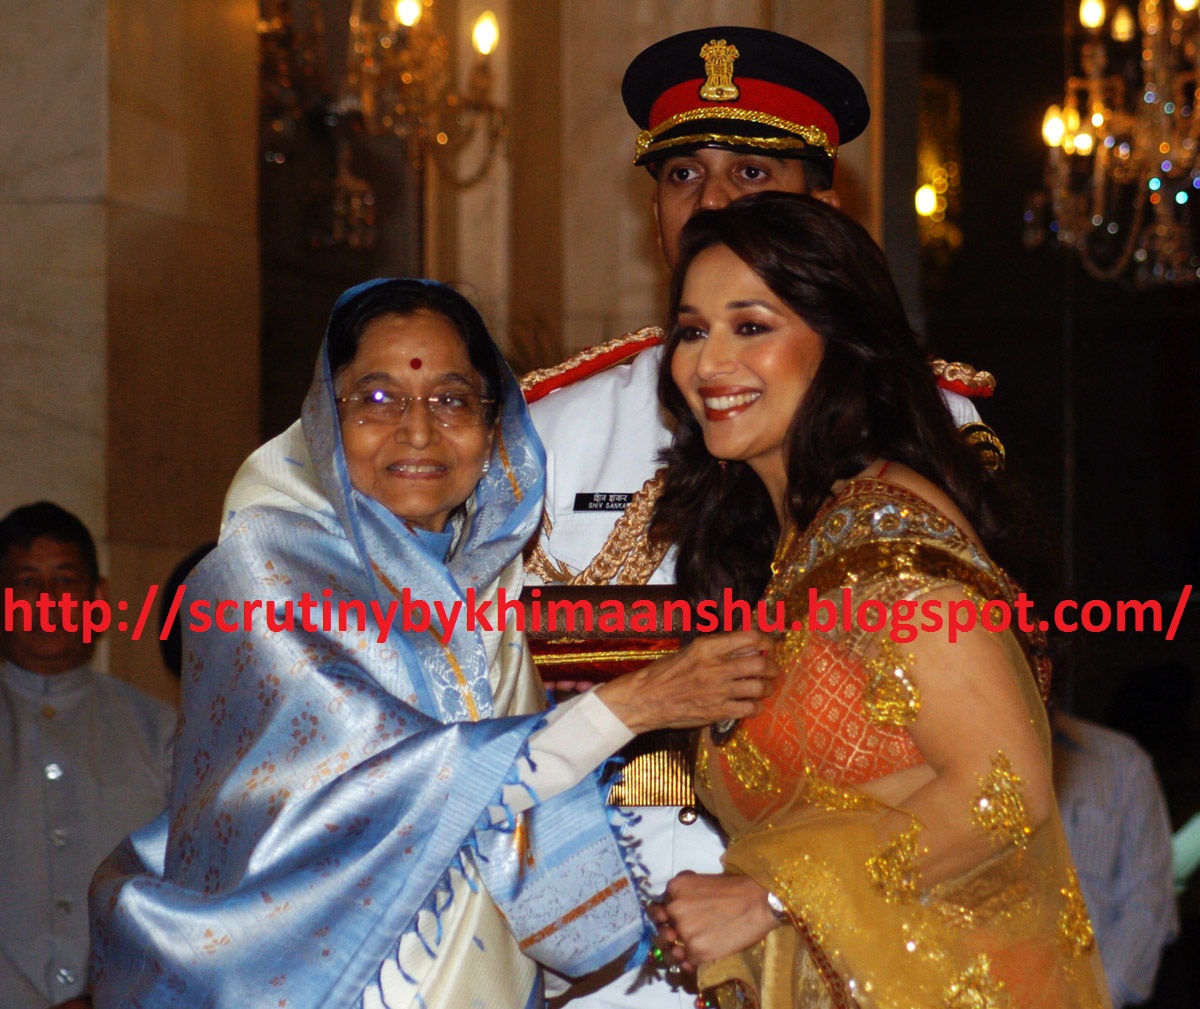 Xxx Movie Madhuri Dixit - Scrutiny: Corruption, frauds, scams need more attention than Madhuri Dixit!